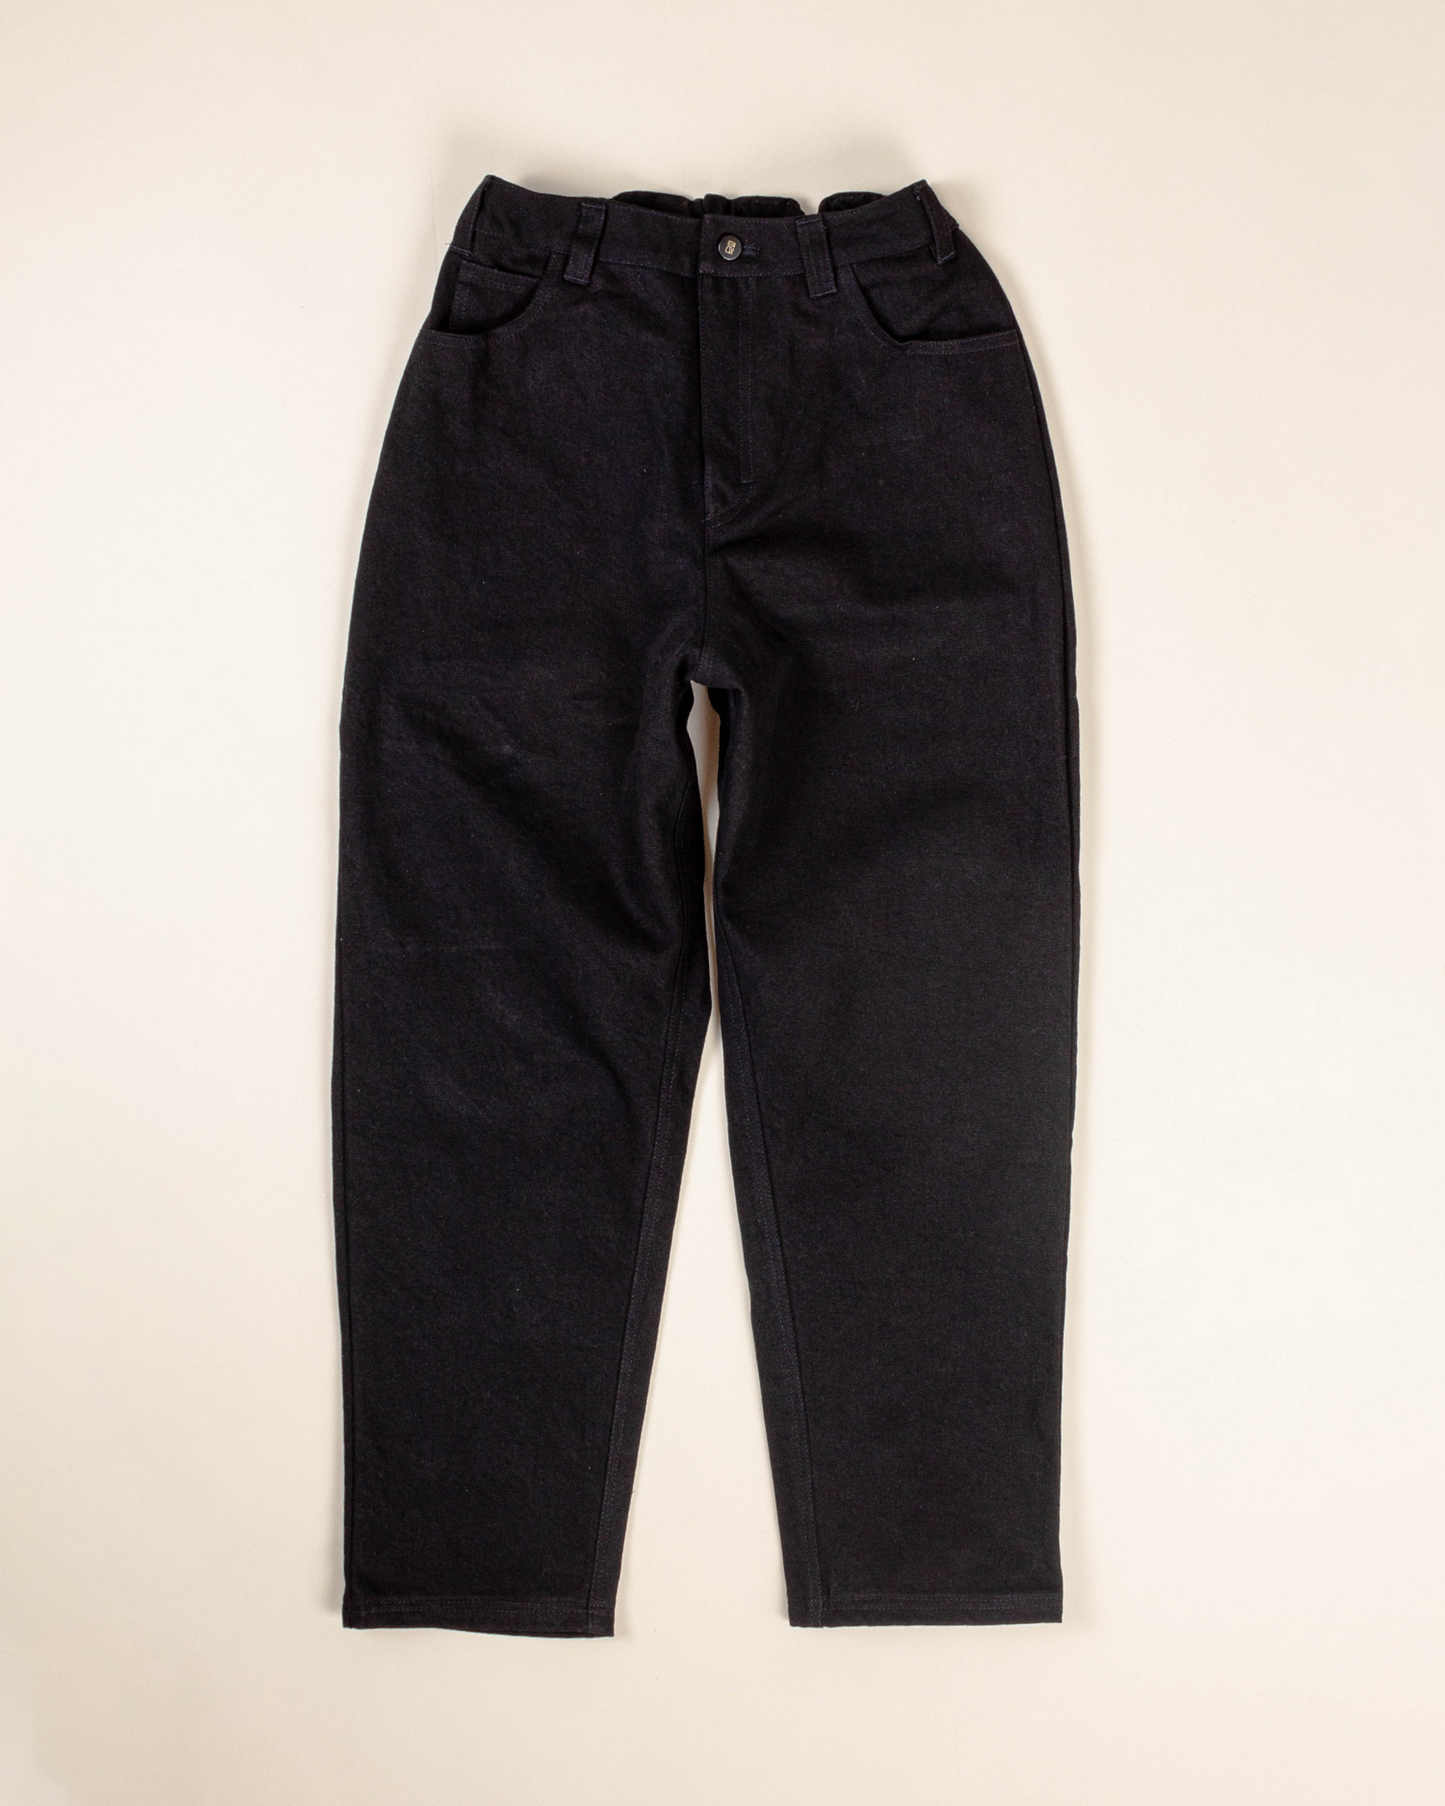 POETIC COLLECTIVE - TAPERED DENIM PANT - BLACK